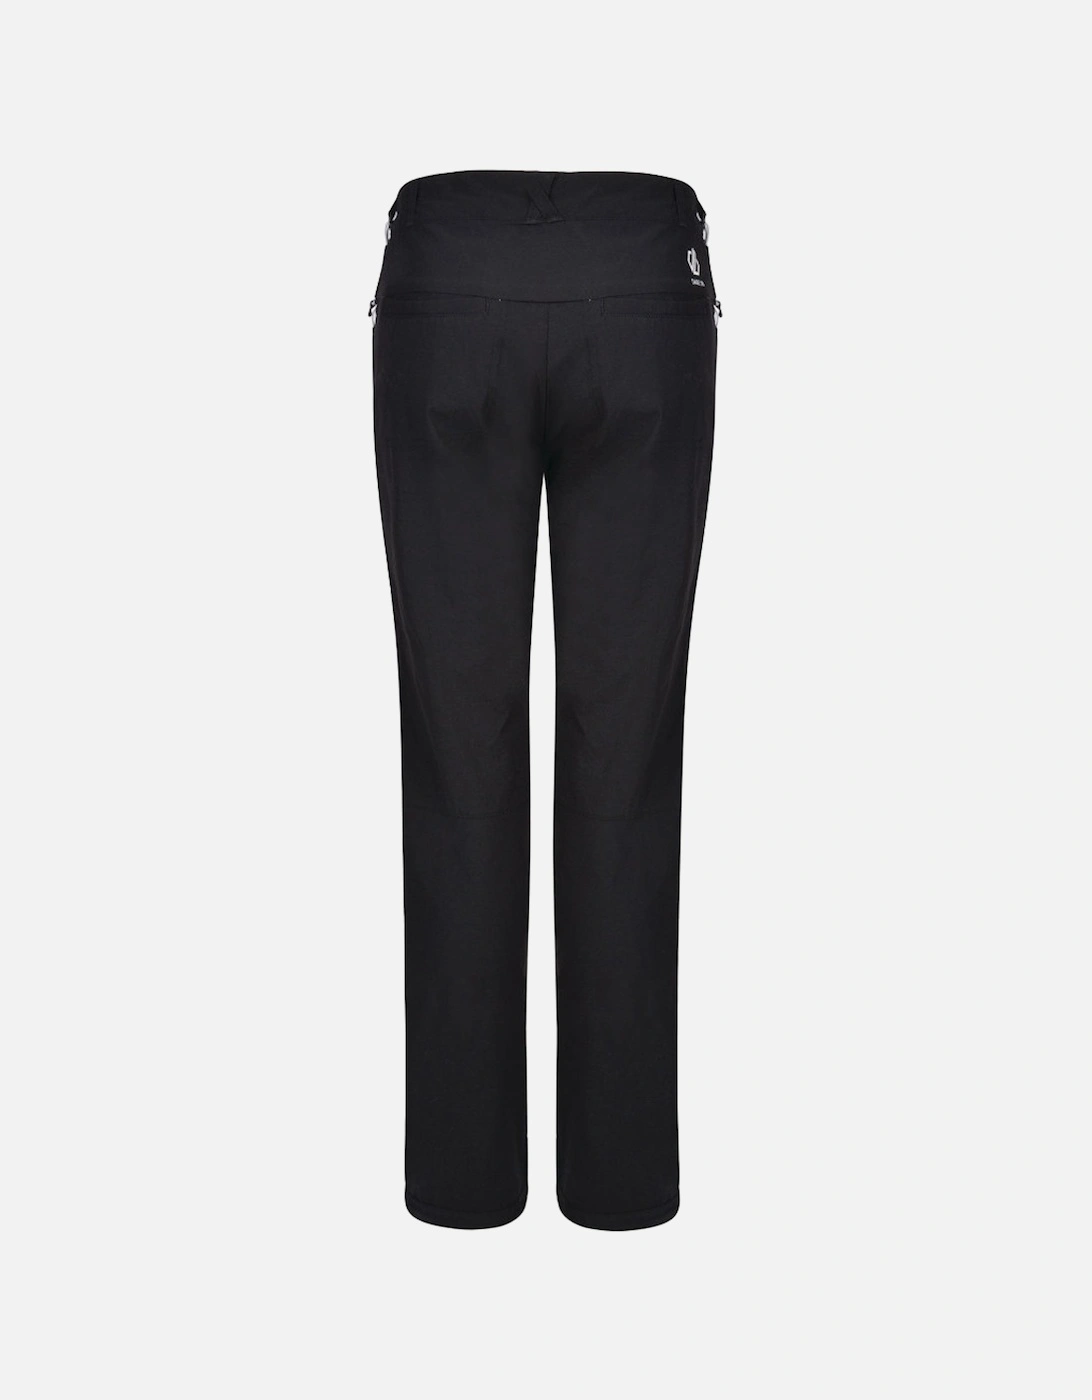 Womens Melodic II Nylon Durable Stretch Trousers